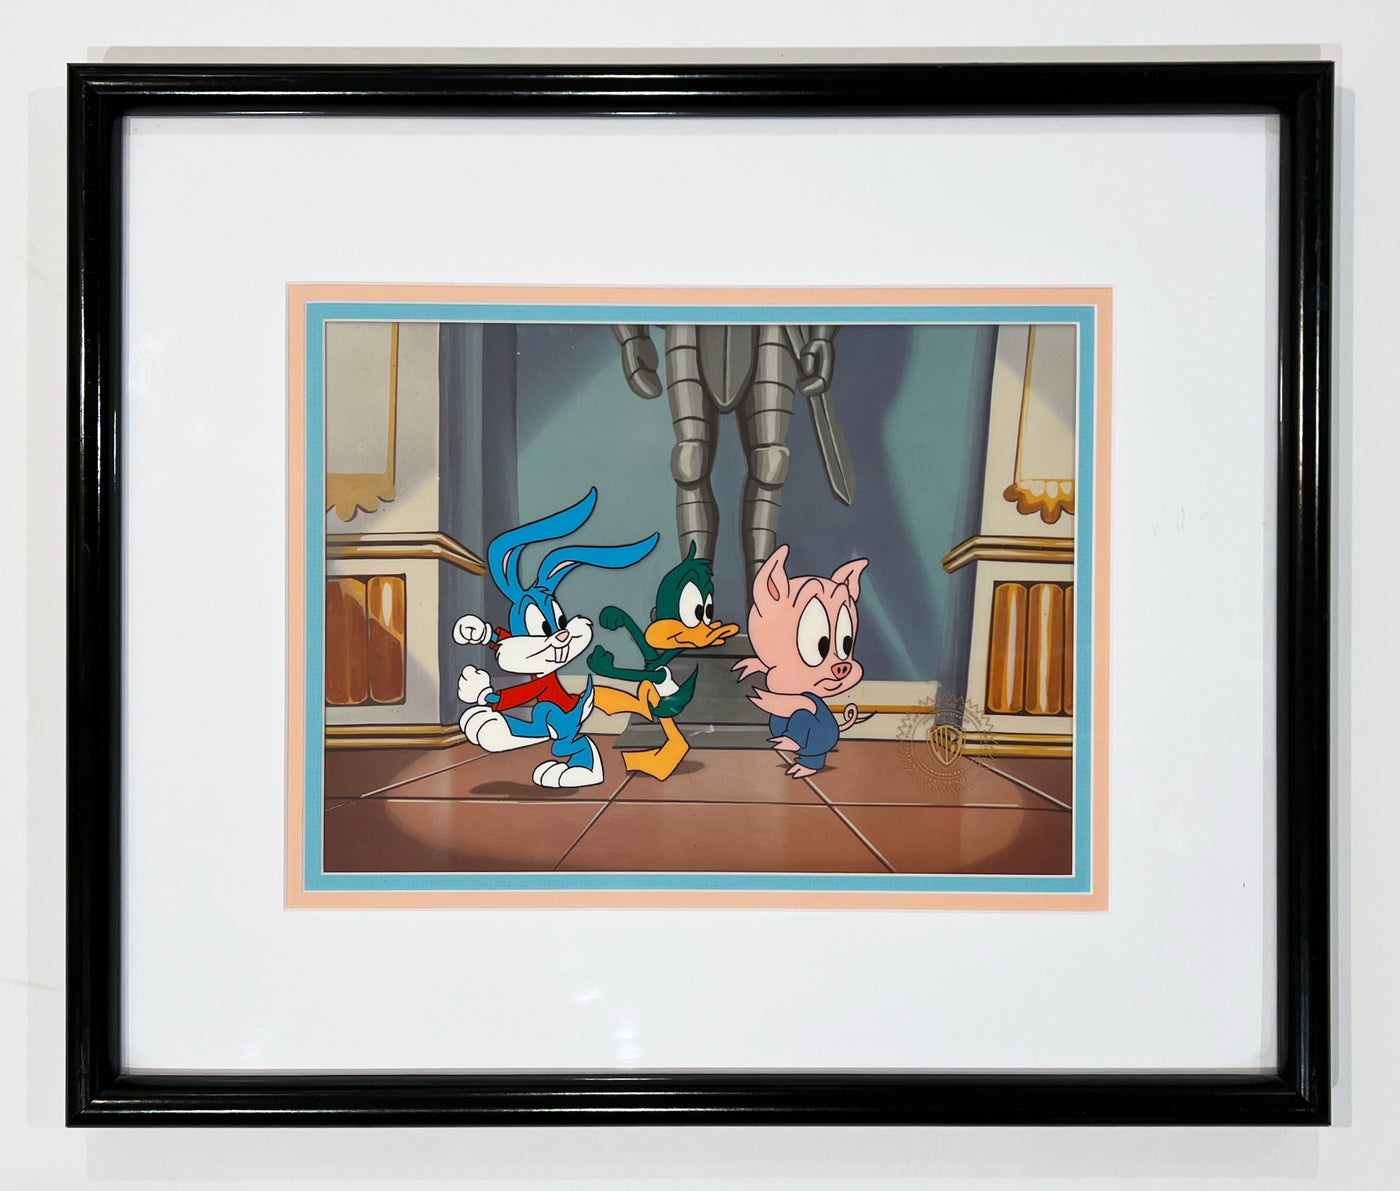 Original Warner Brothers Tiny Toons Adventures TV Production Cel "Europe in 30 Minutes" featuring Buster Bunny, Plucky Duck and Hampton J. Pig